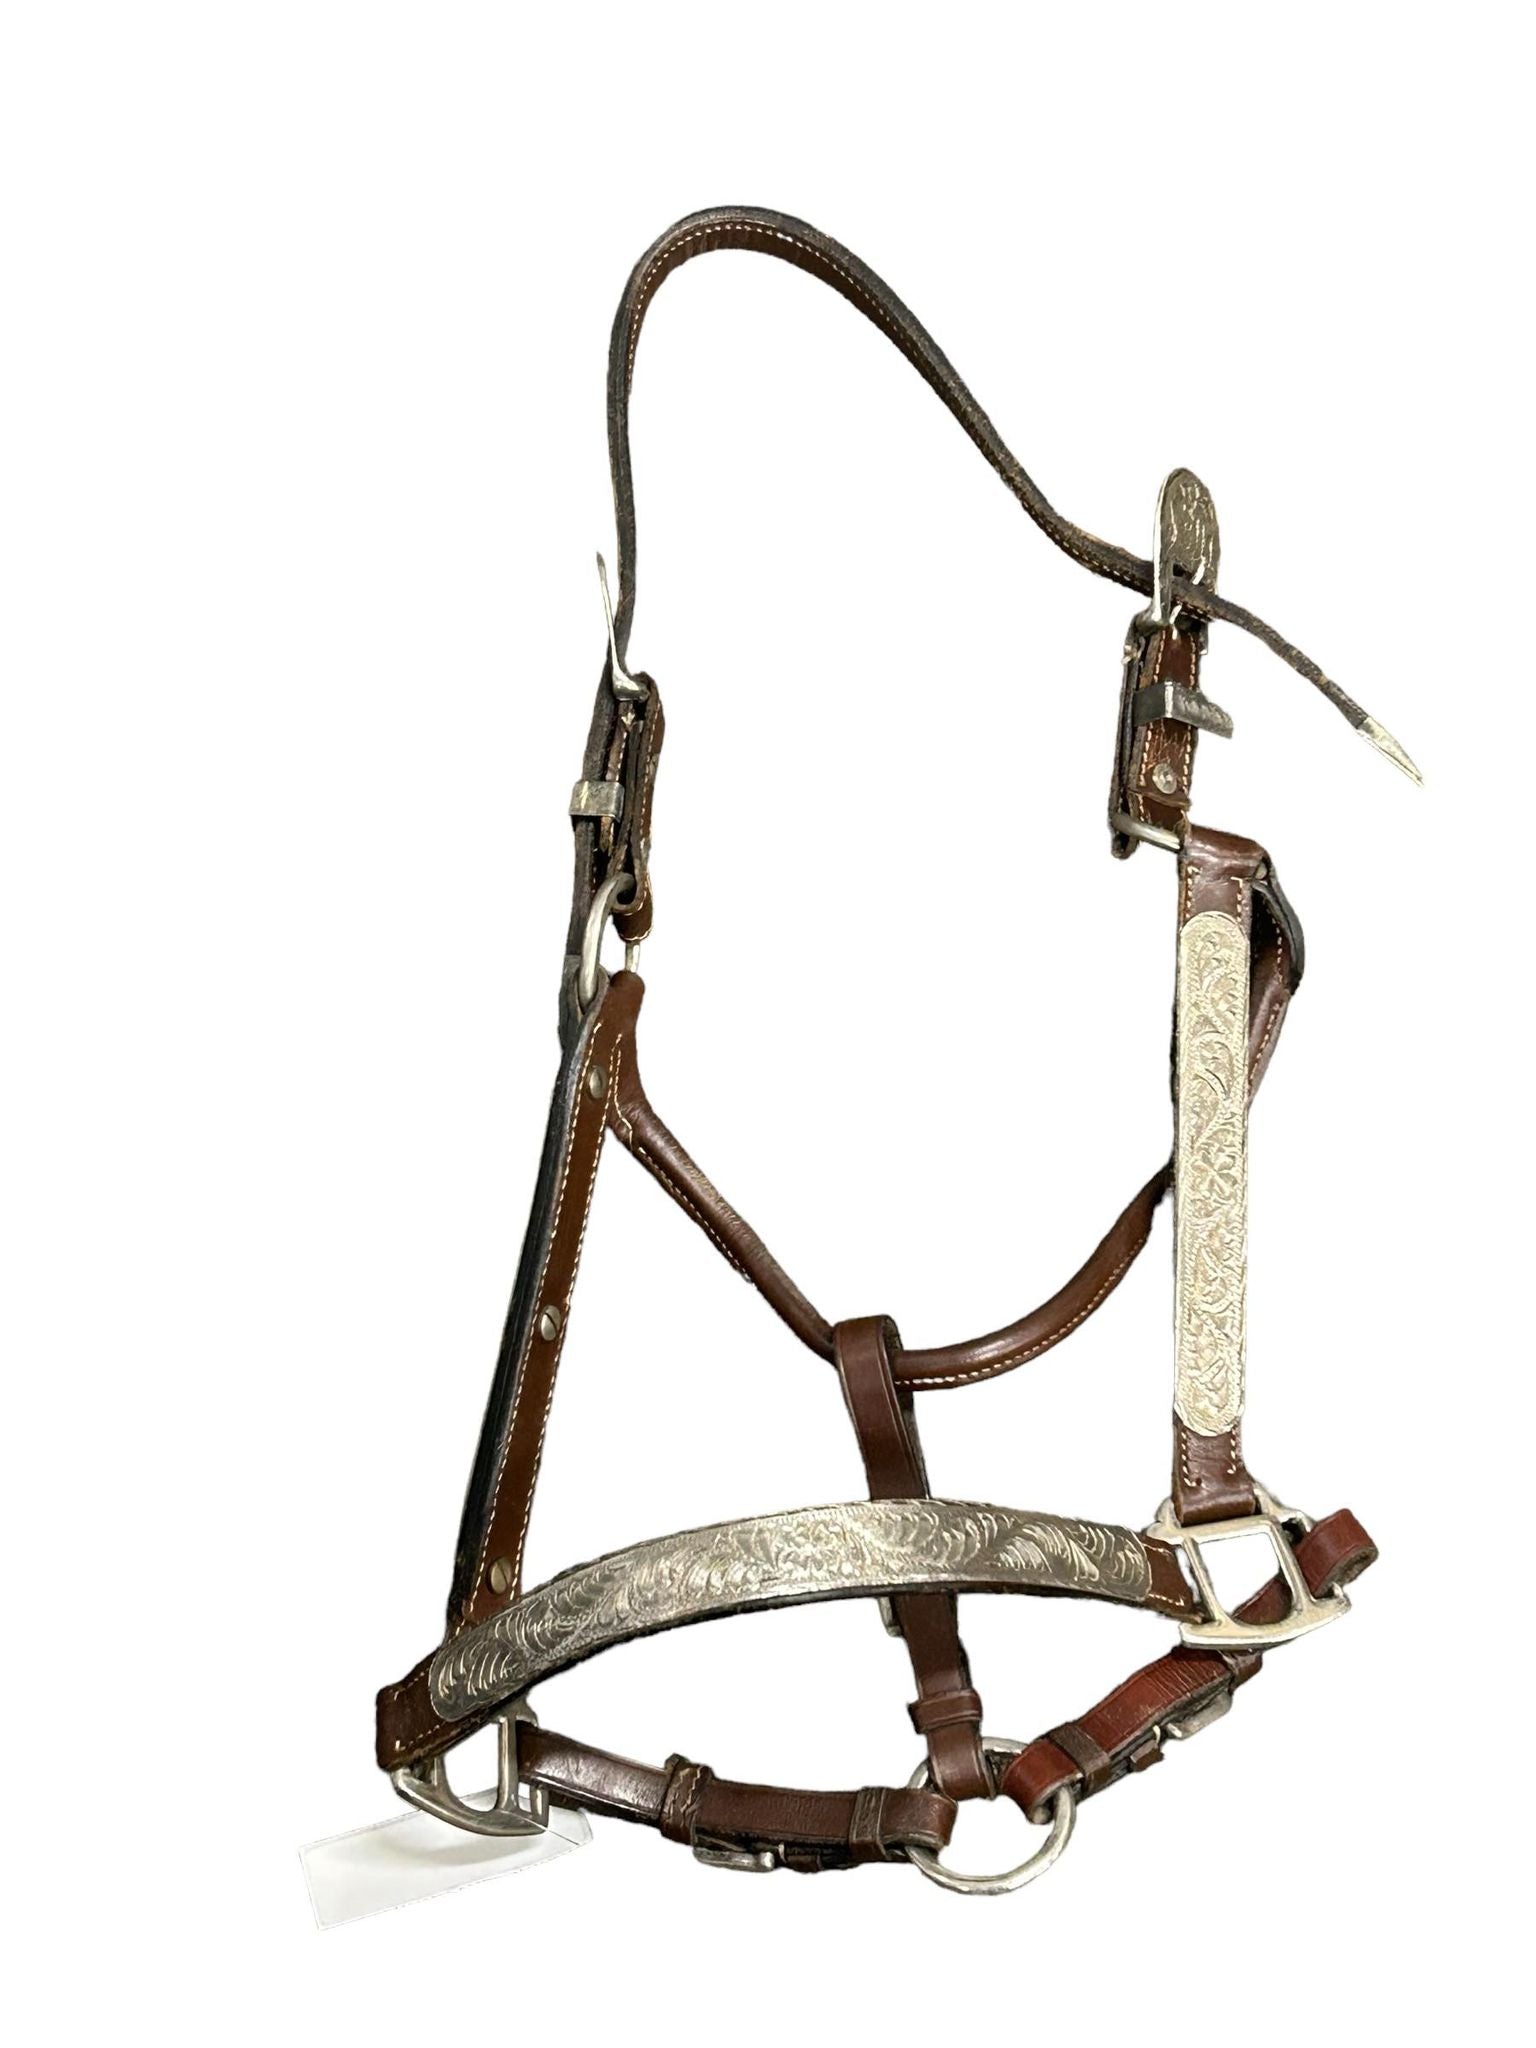 Western Halters & Combination Halters you will find at